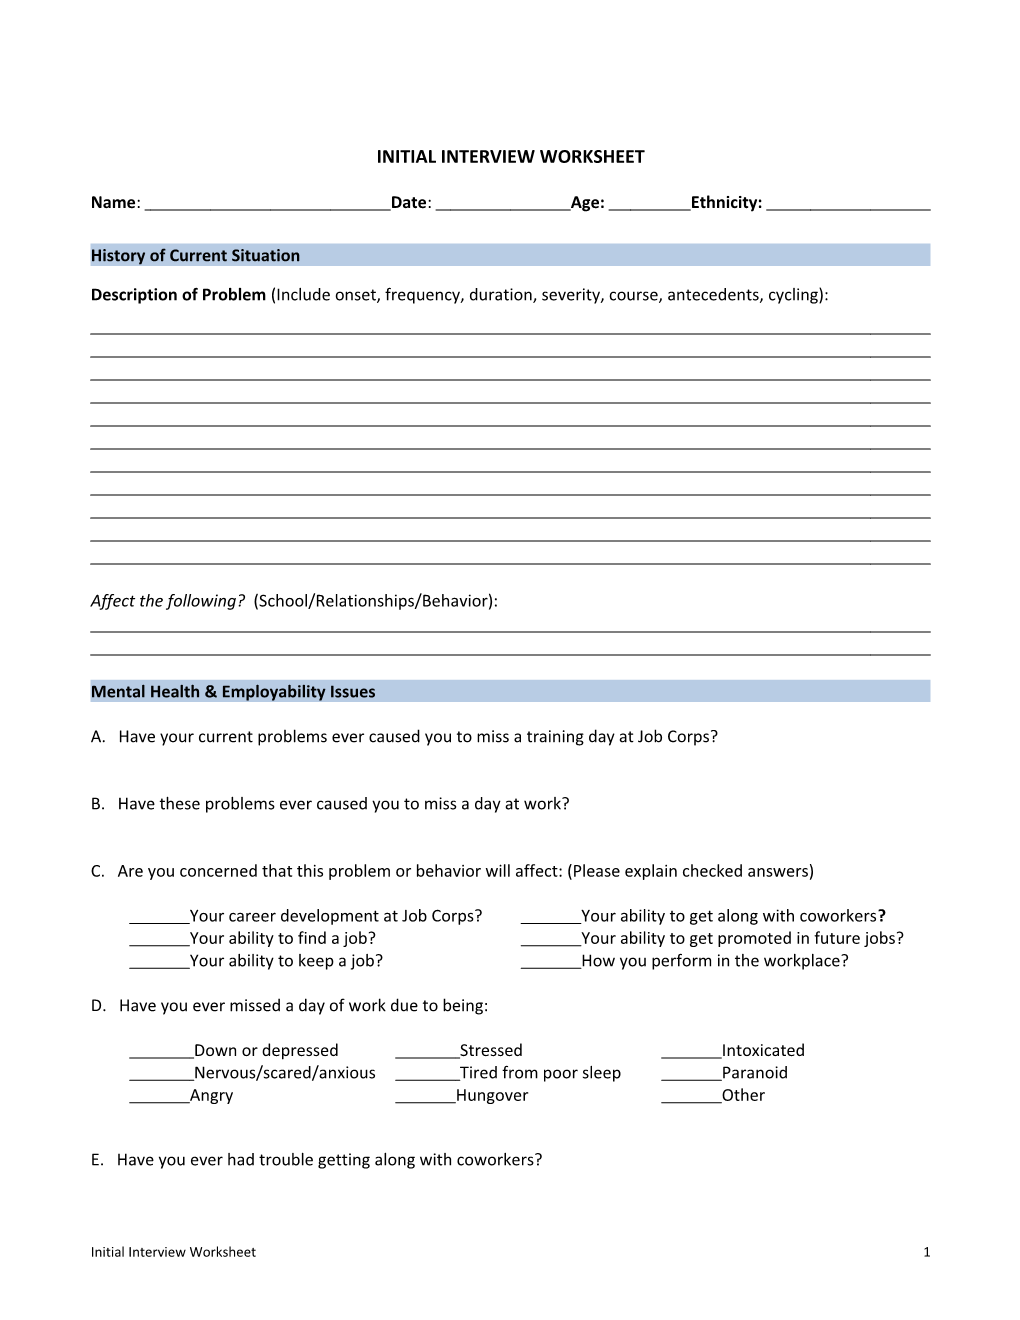 Initial Interview Worksheet